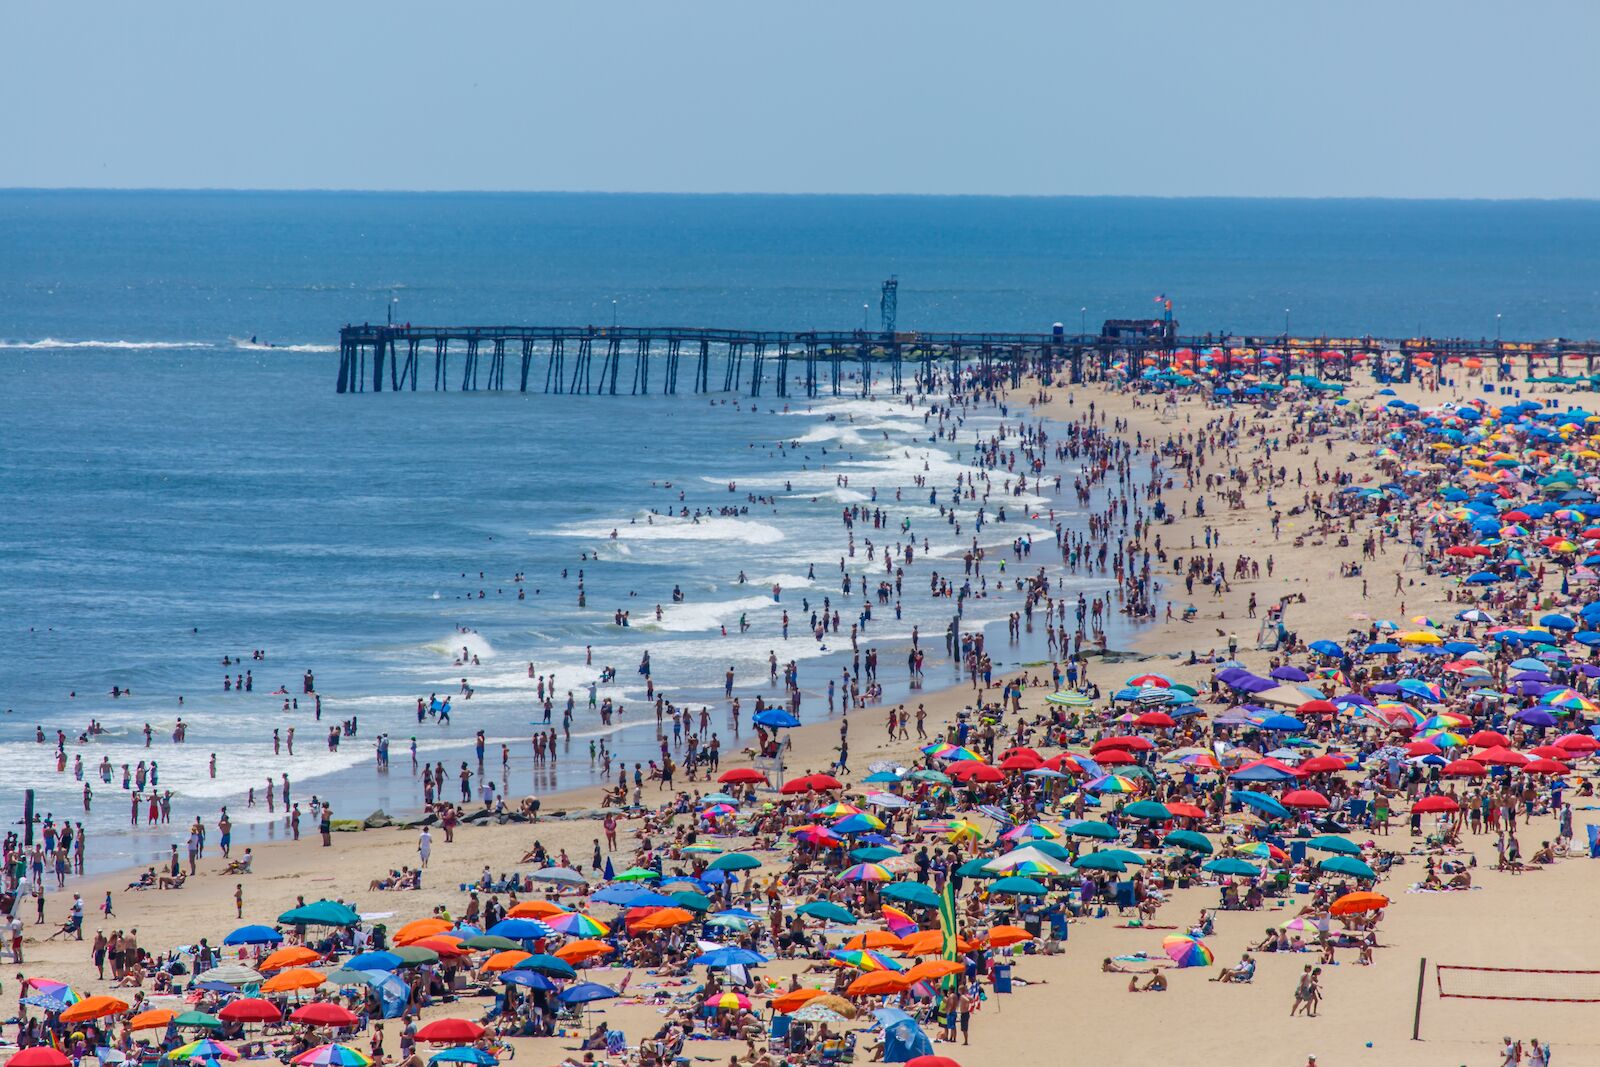 things to do in ocean city maryland - beach crowded